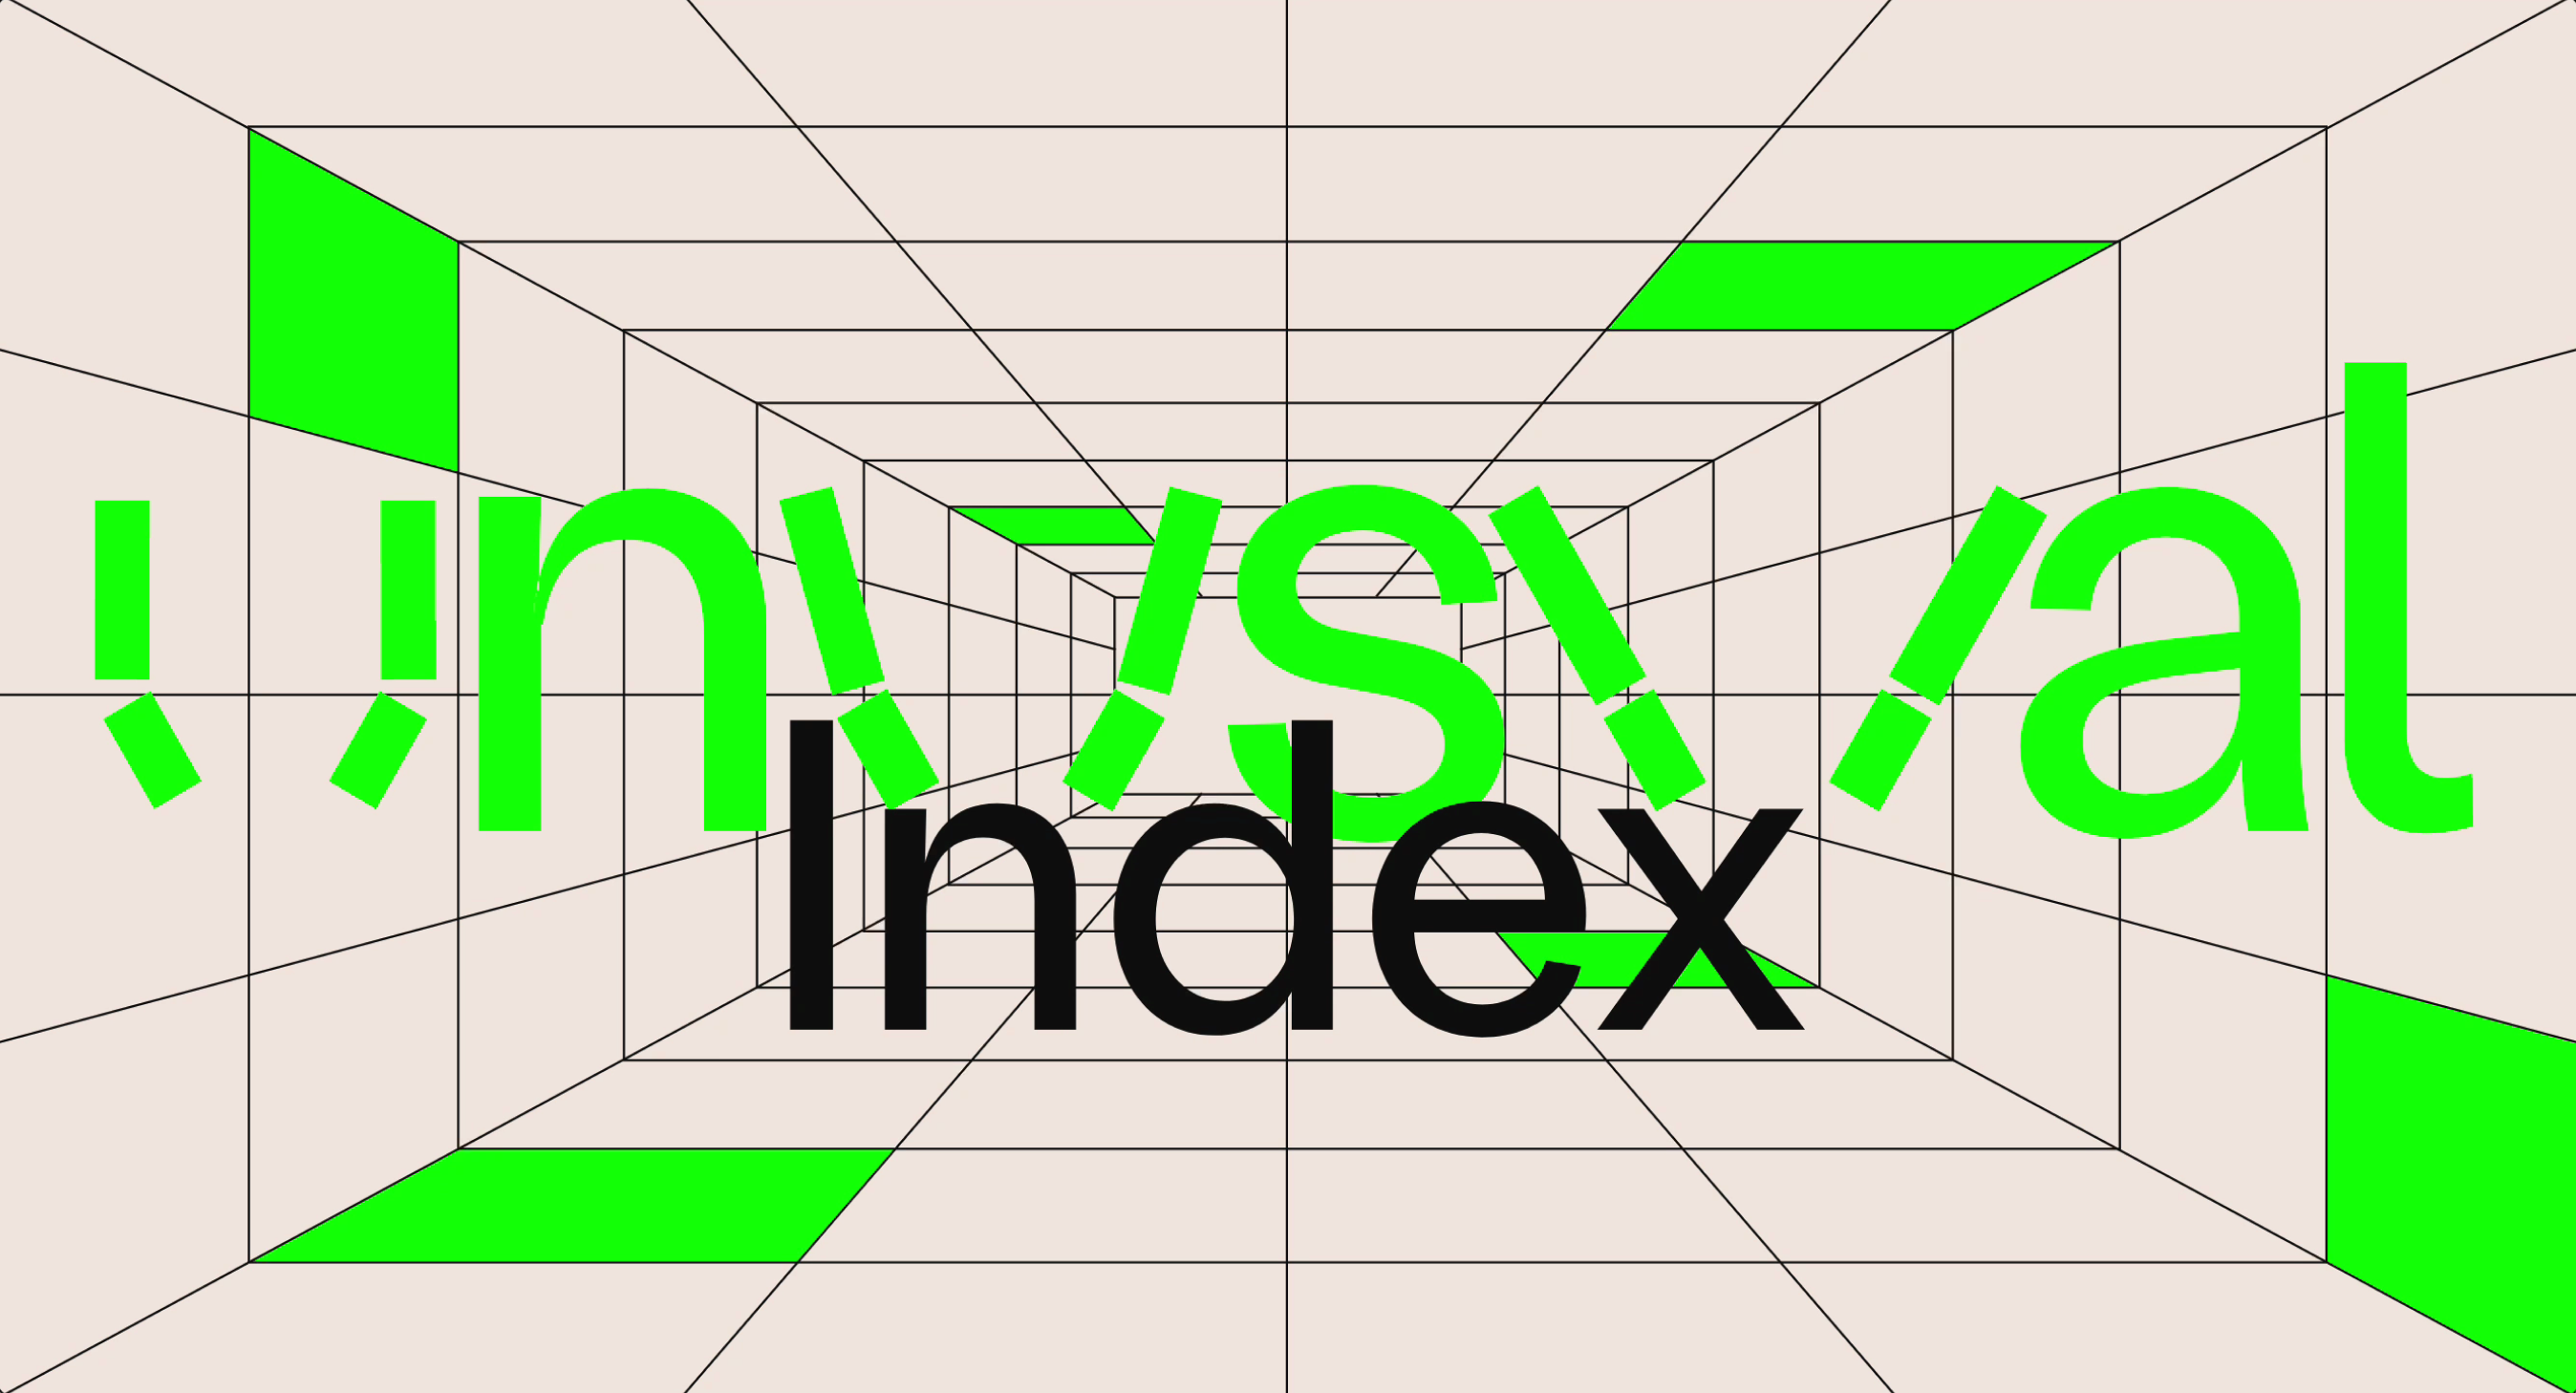 "Unusual Index" is centered on a 3D tunnel perspective. Some cells on the grid are green. Wireframe style.